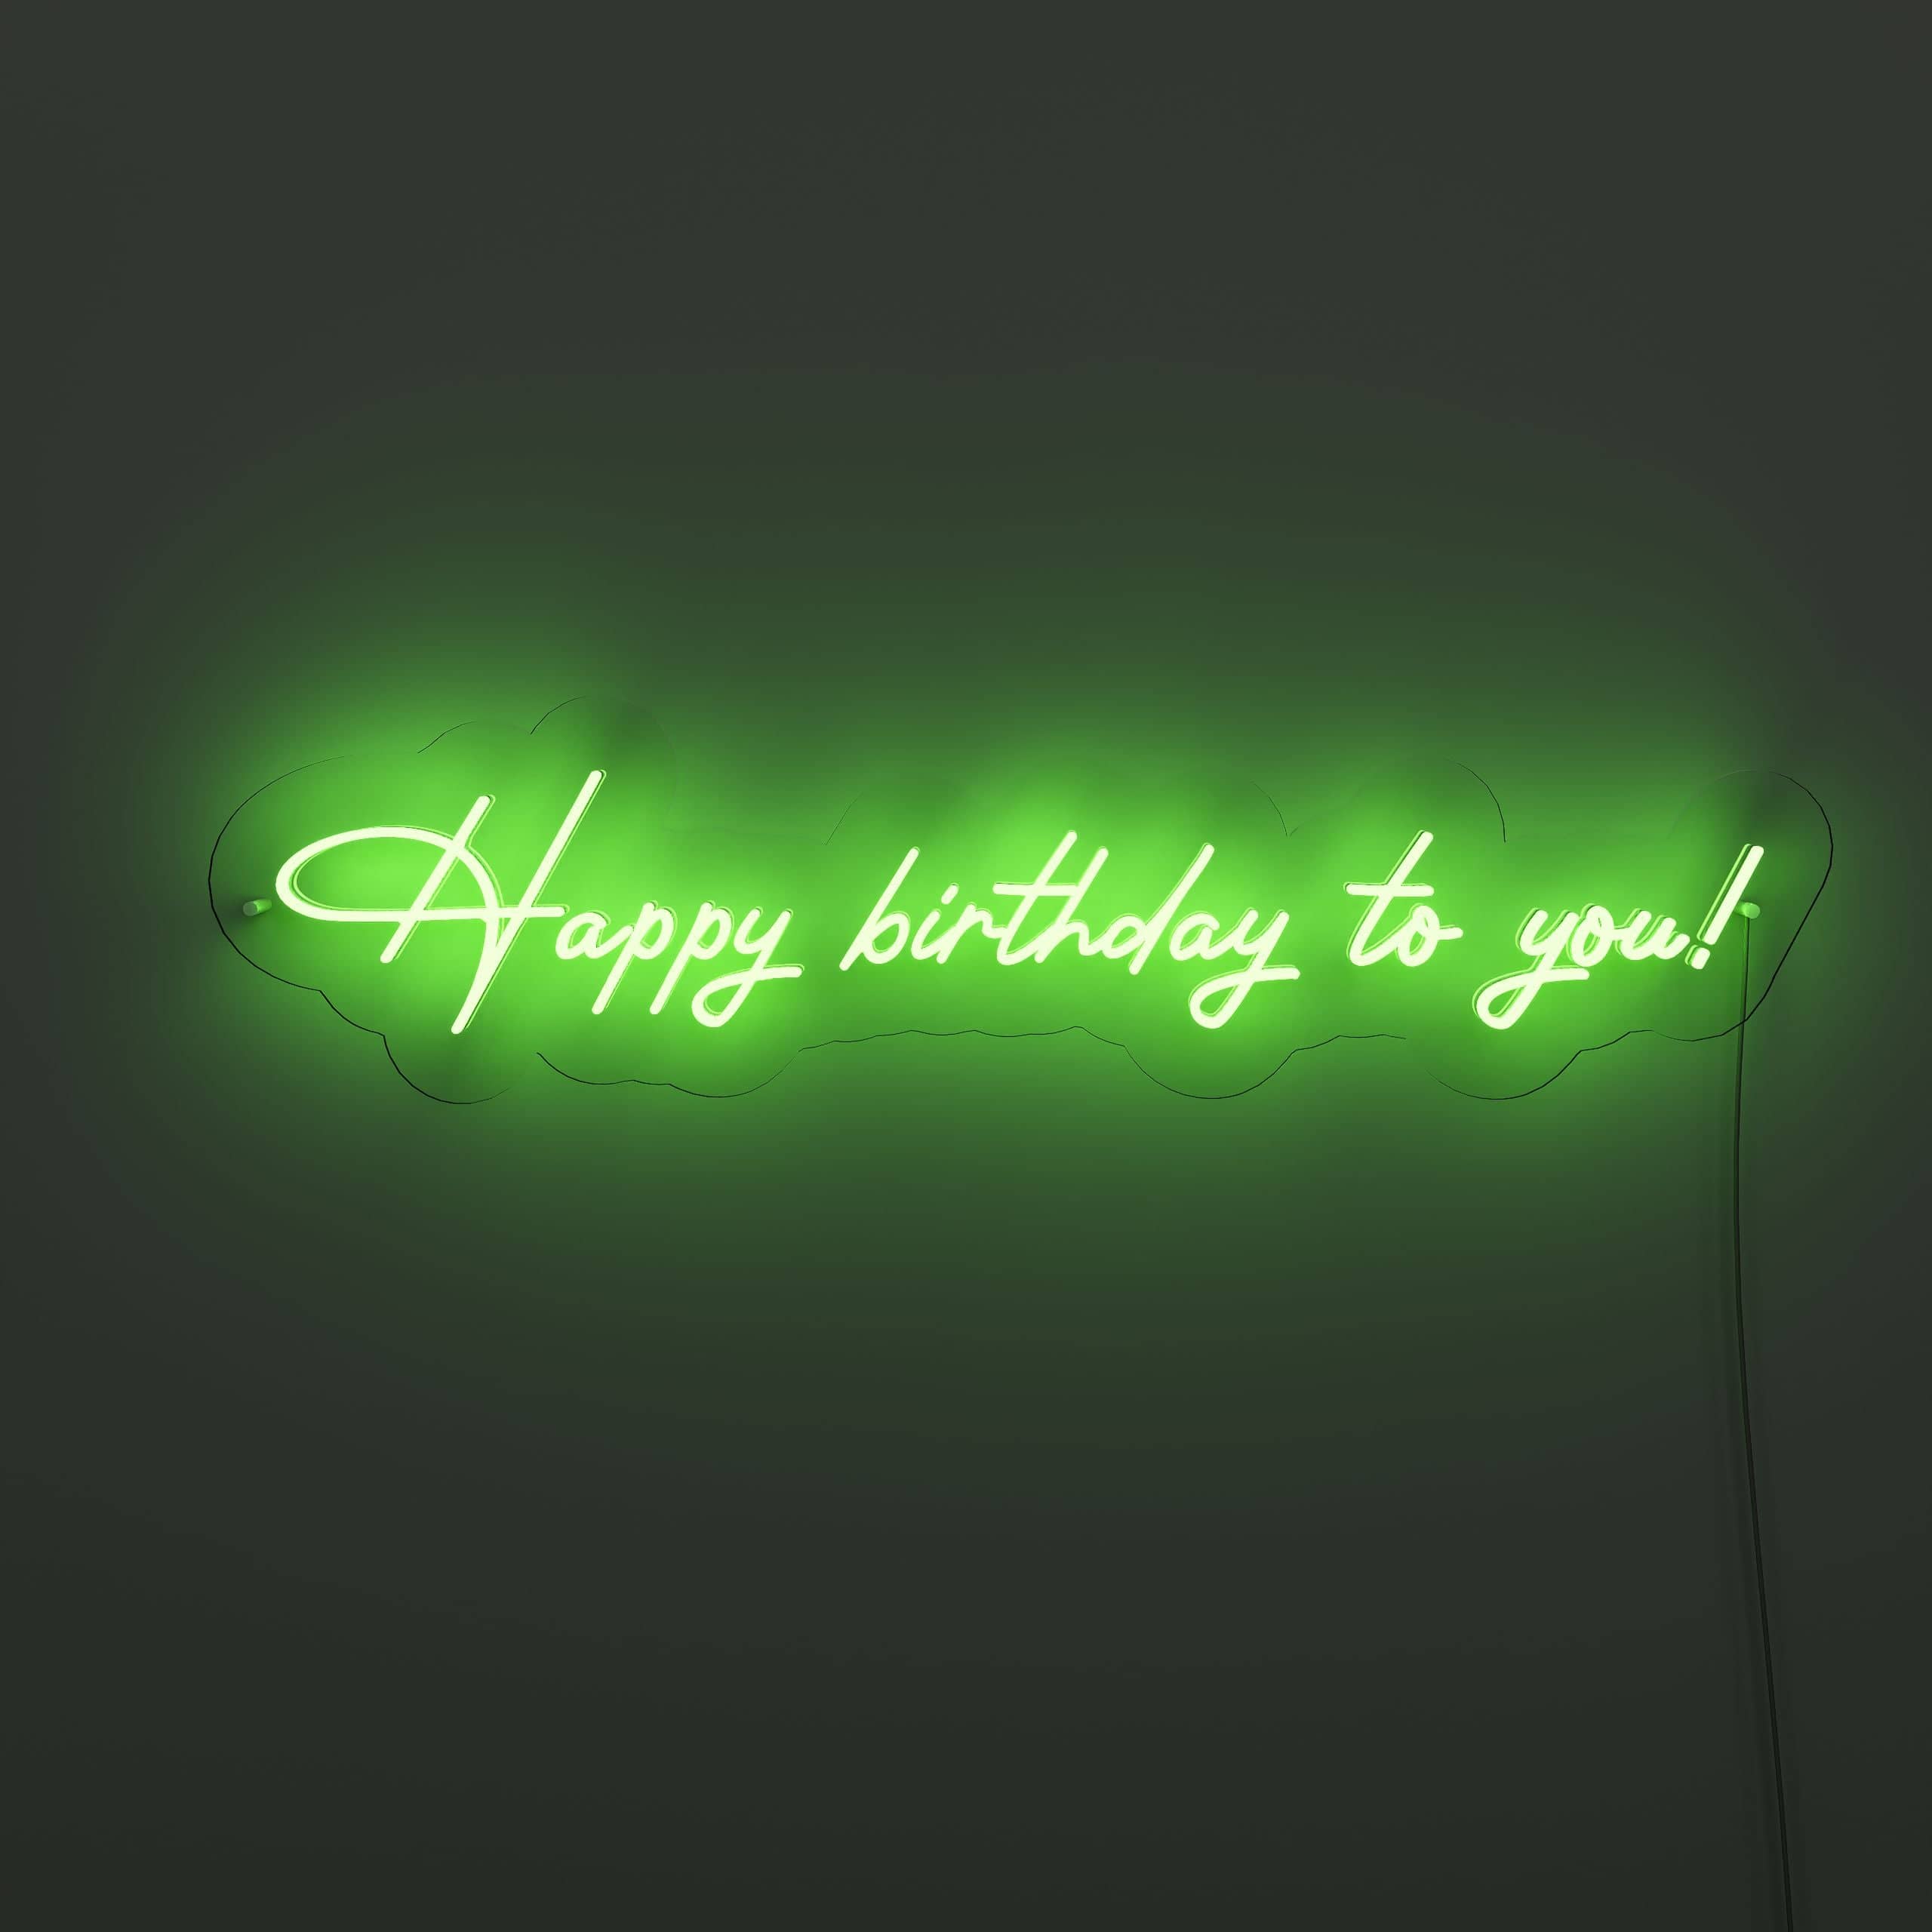 wishing-you-a-day-of-pure-happiness!-neon-sign-lite